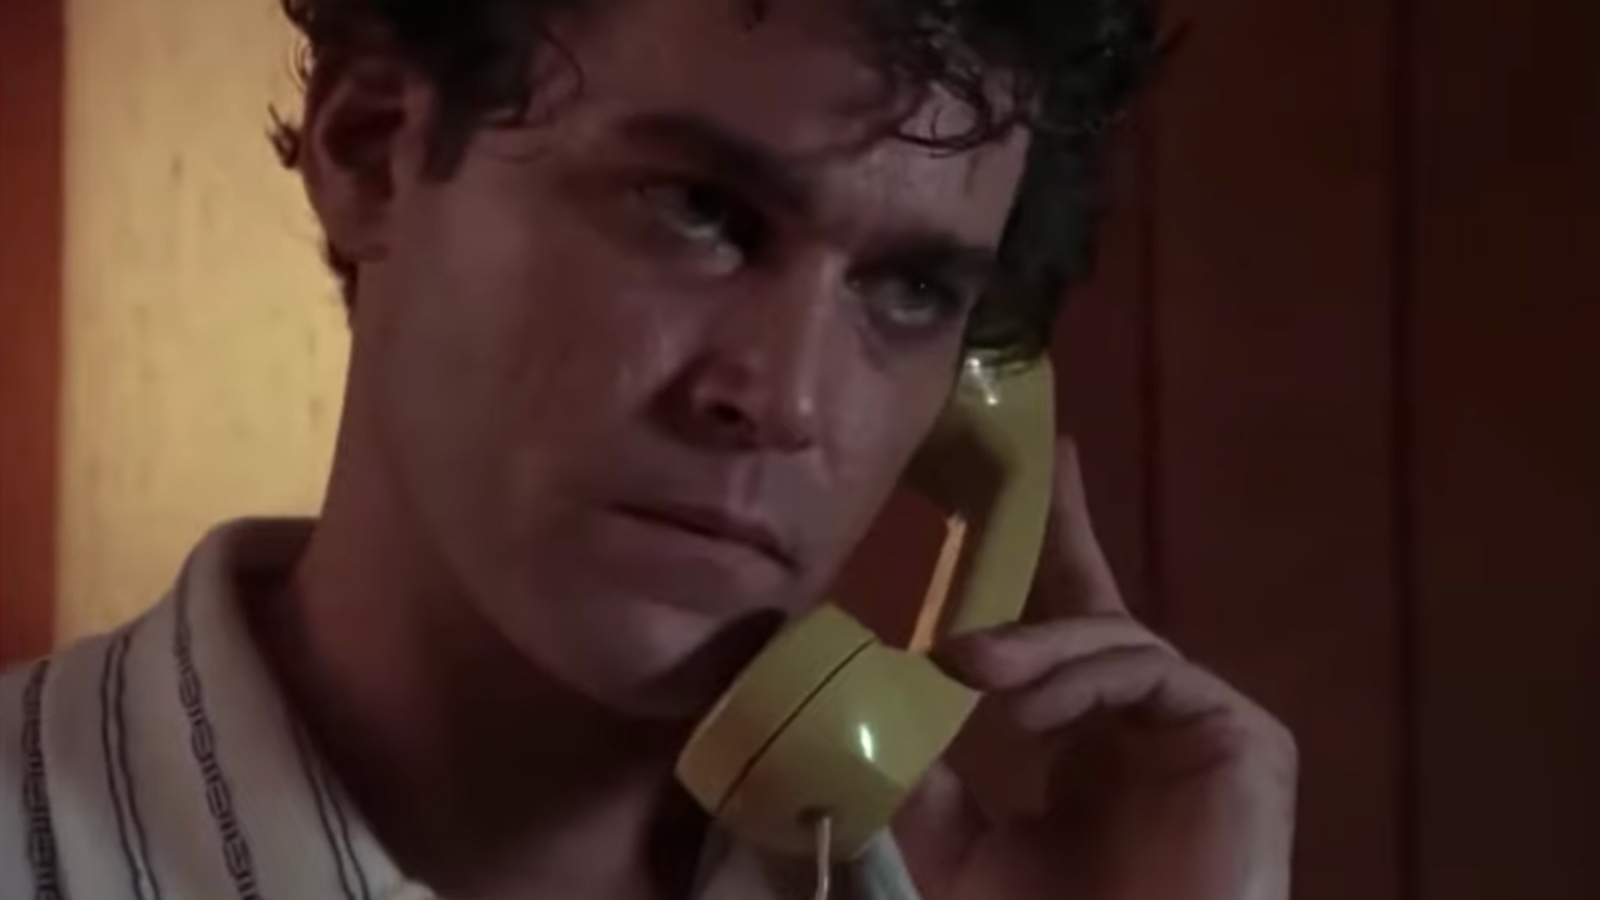 The goodfellas scene that made ray liotta a superstar â rolling stone